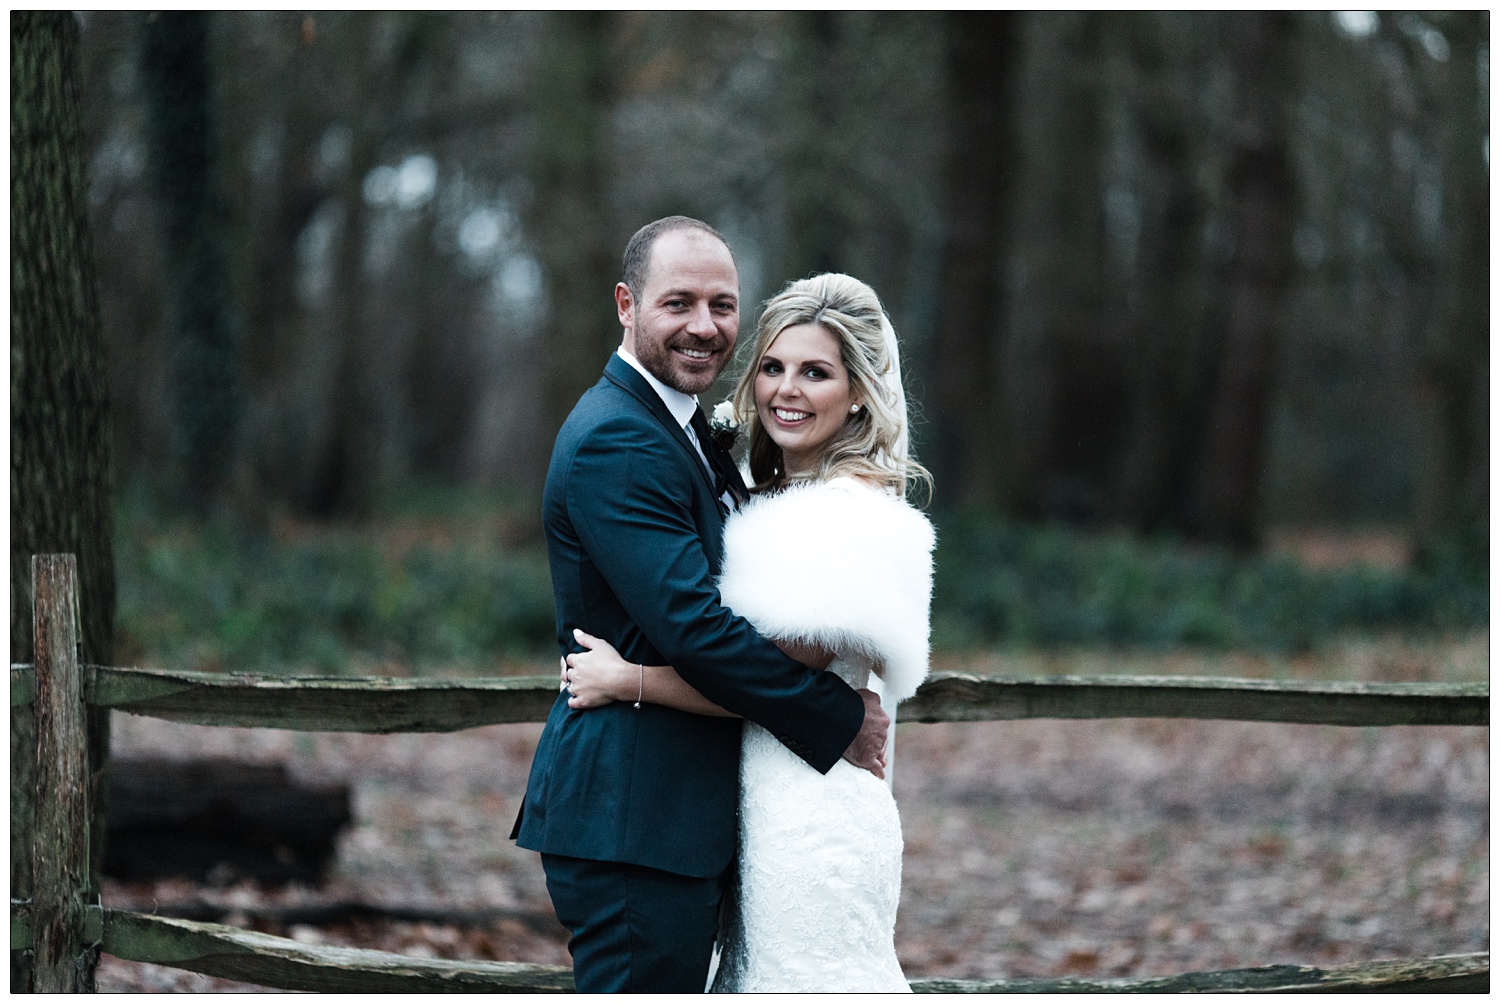 Newly married couple photographs in Hockley woods in December. It's starting to get dark.